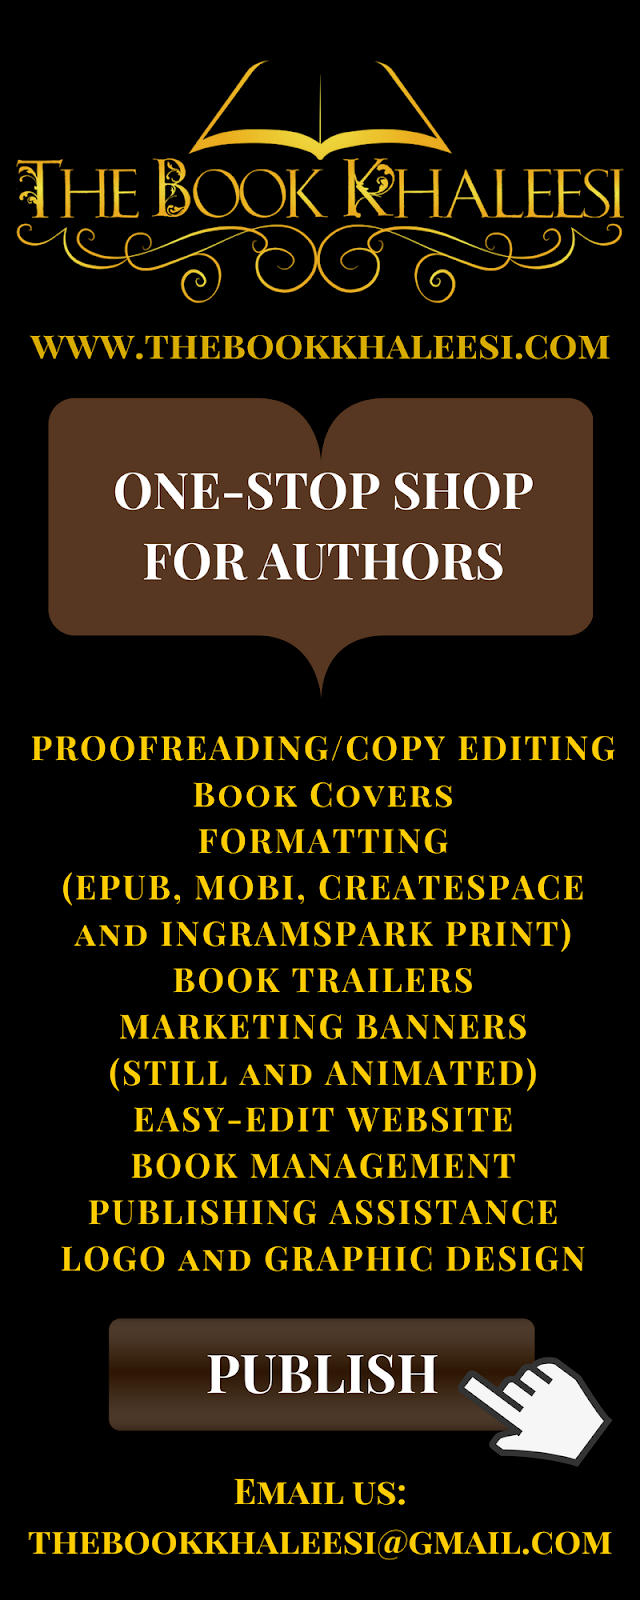 Affordable Class-A Author Services